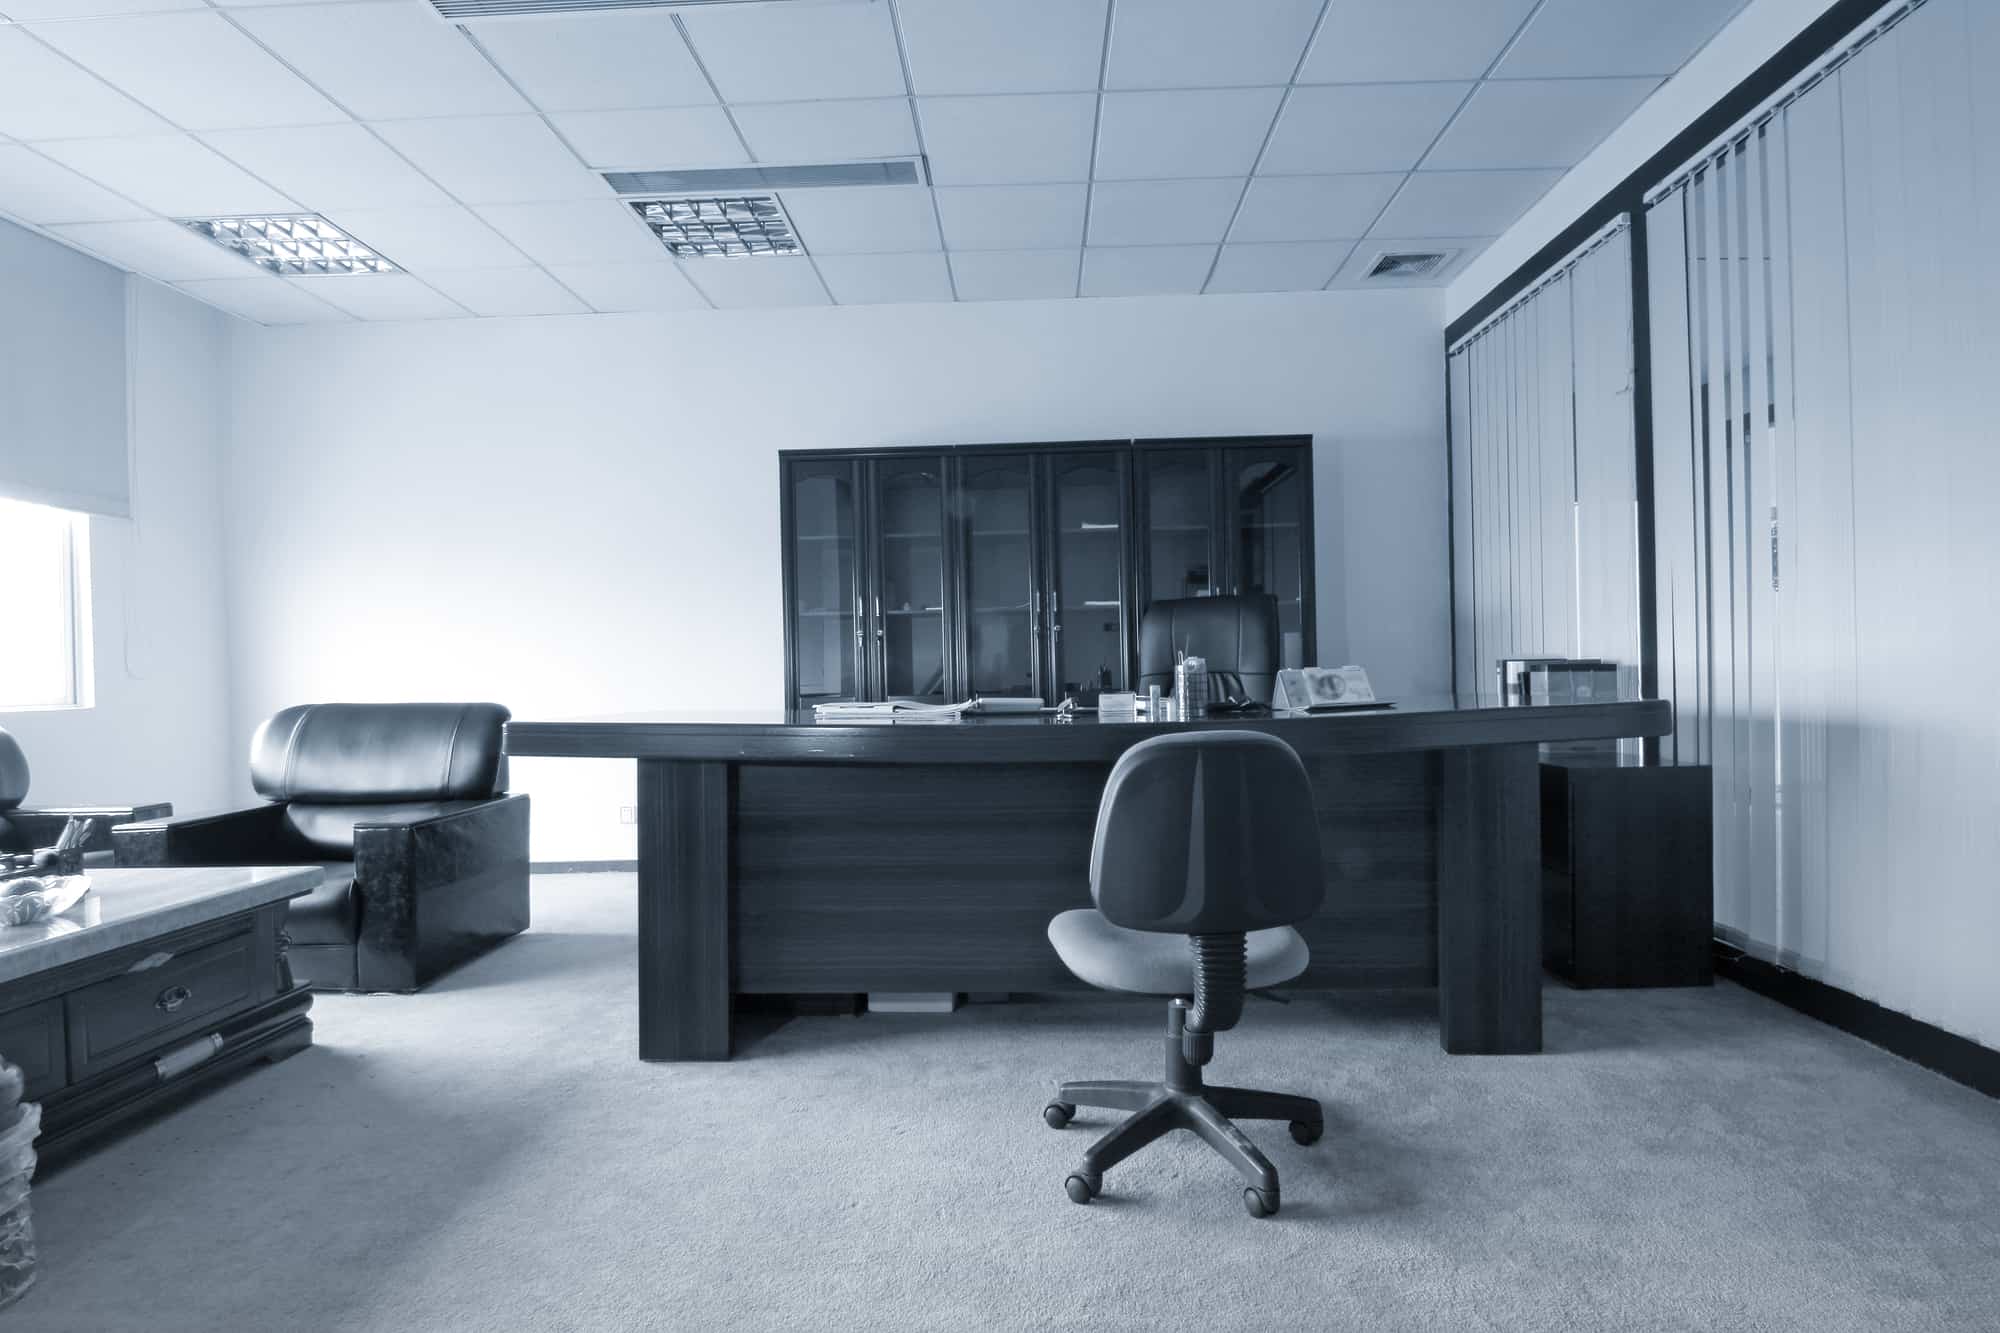 A monochrome image of a spacious, vacant C-suite office with a large desk, chair, and shelving units under fluorescent lighting.